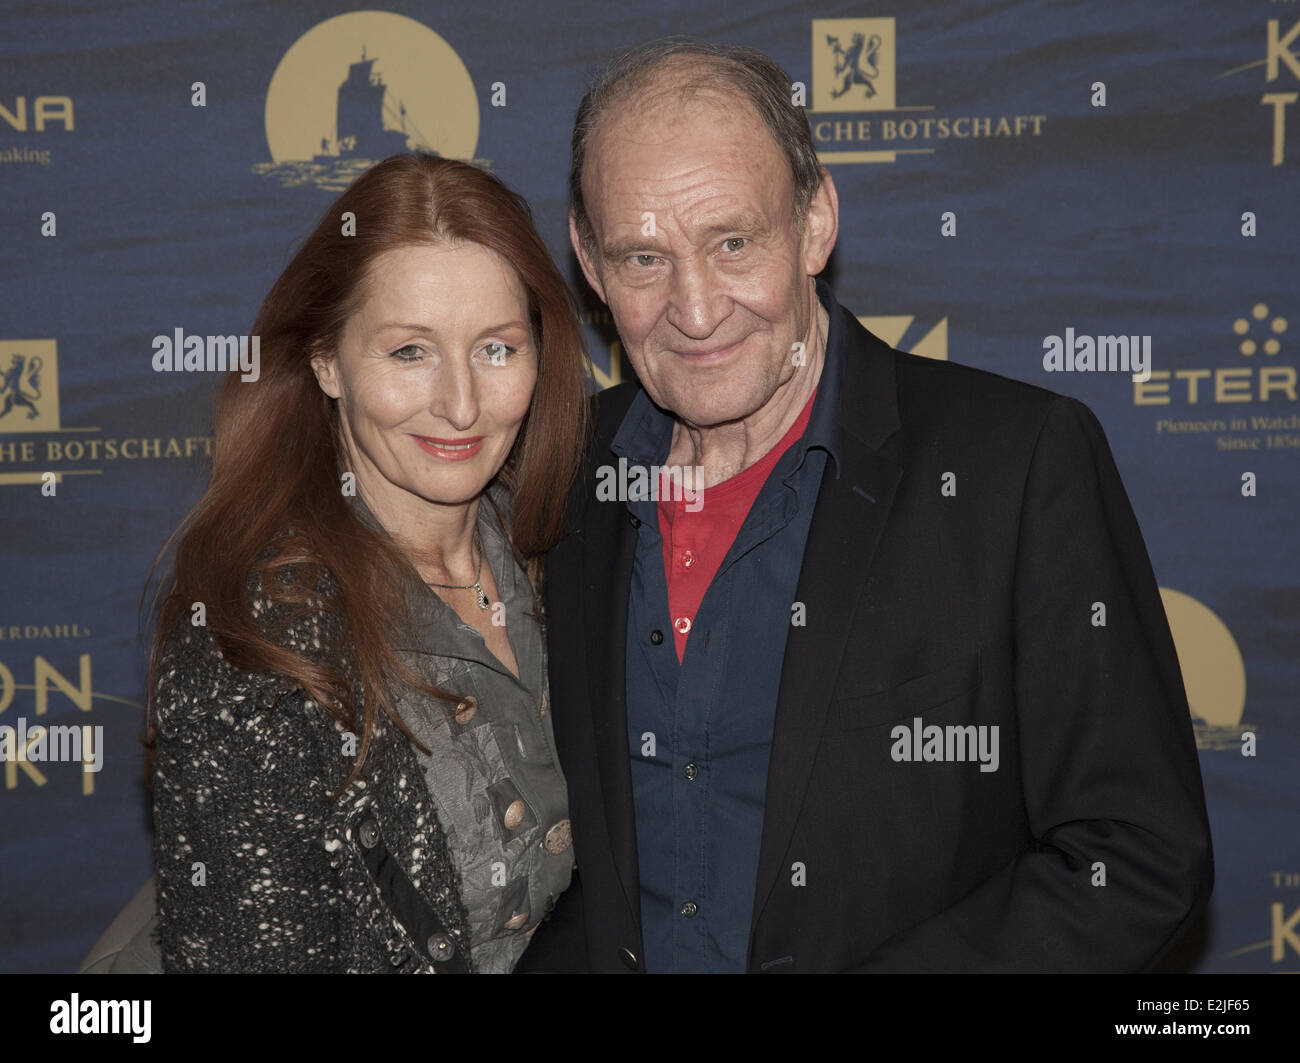 Michael Mendel and woman at the premiere of 'Kon-Tiki' at Kino  International movie theater. Where: Berlin, Germany When: 06 Mar 2013 Stock  Photo - Alamy